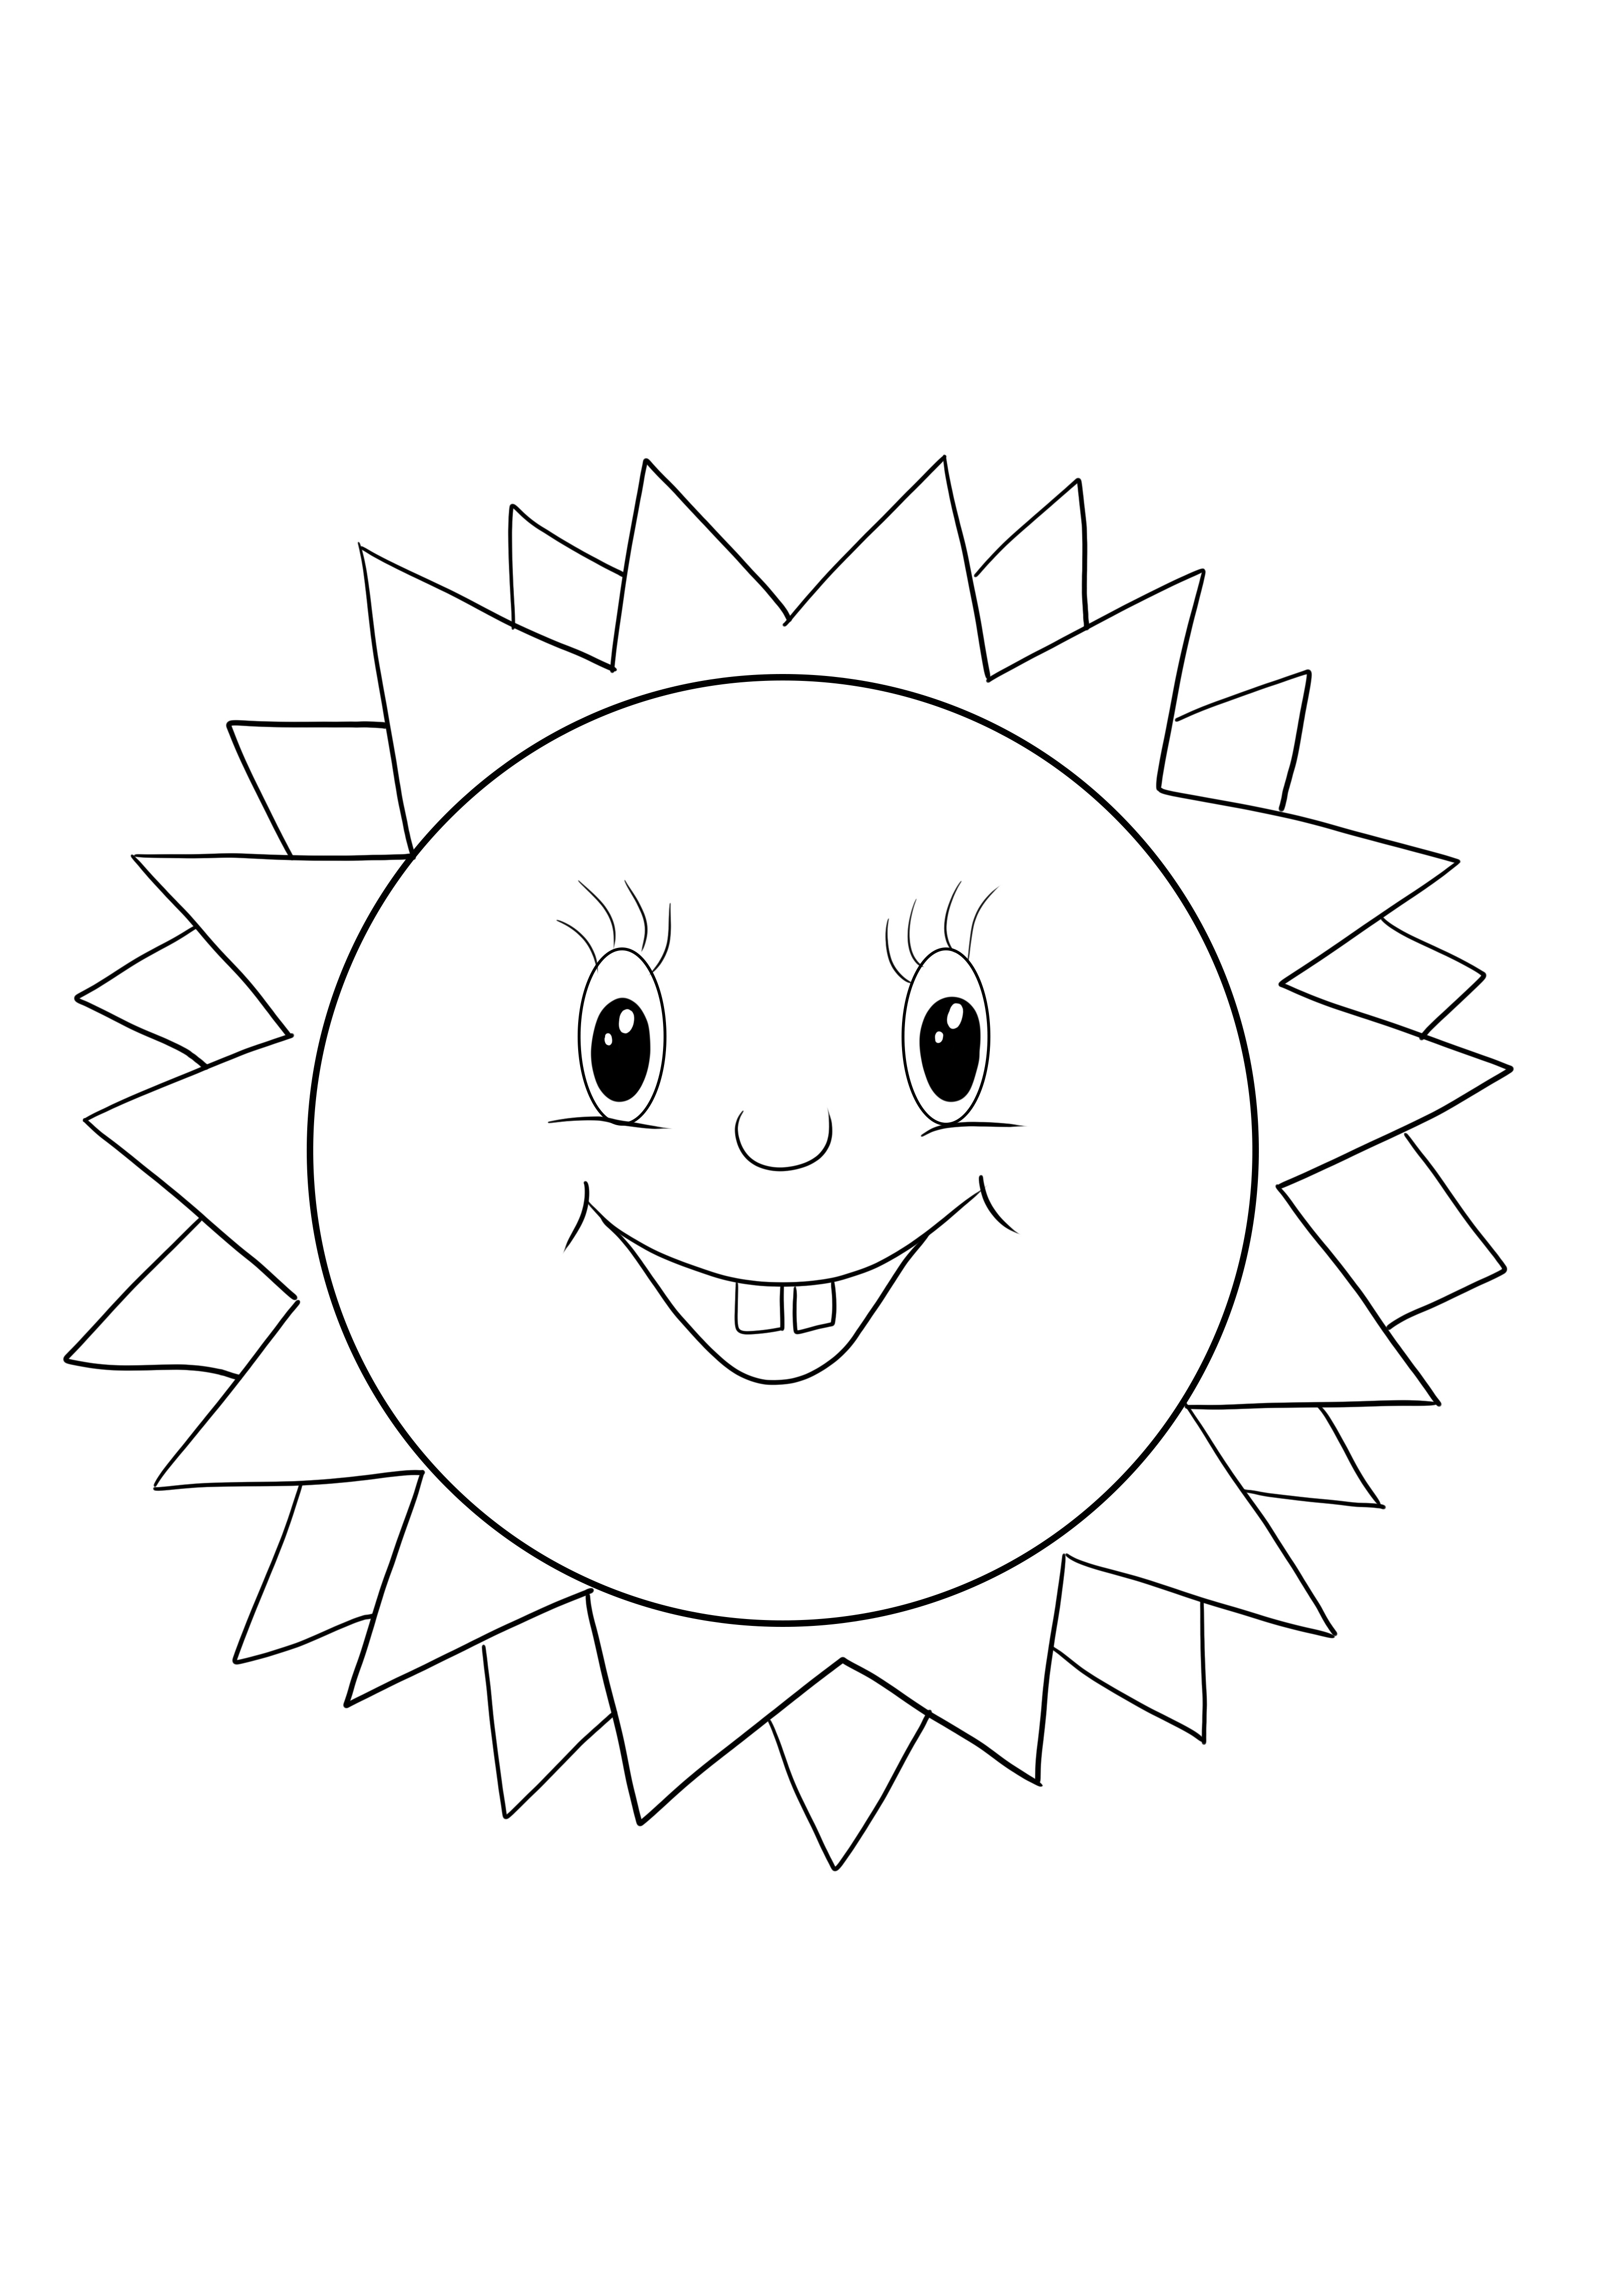 Smiling sun-free coloring and printing image